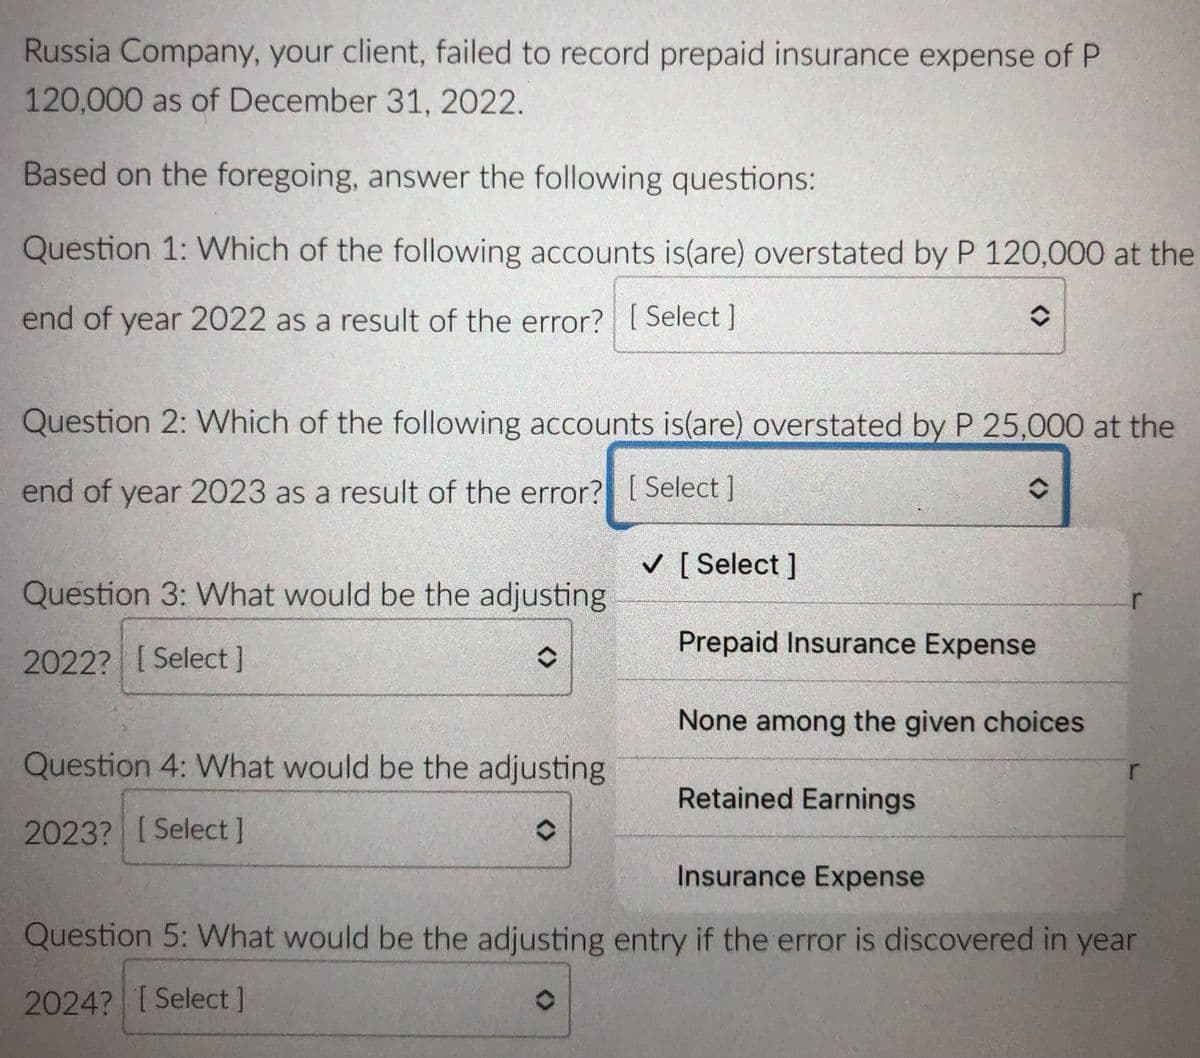 Russia Company, your client, failed to record prepaid insurance expense of P
120,000 as of December 31, 2022.
Based on the foregoing, answer the following questions:
Question 1: Which of the following accounts is(are) overstated by P 120,000 at the
end of year 2022 as a result of the error? [ Select ]
Question 2: Which of the following accounts is(are) overstated by P 25,000 at the
end of year 2023 as a result of the error? [ Select ]
V [ Select ]
Question 3: What would be the adjusting
Prepaid Insurance Expense
2022? [ Select]
None among the given choices
Question 4: What would be the adjusting
Retained Earnings
2023? ISelect]
Insurance Expense
Question 5: What would be the adjusting entry if the error is discovered in year
2024? ISelect]
